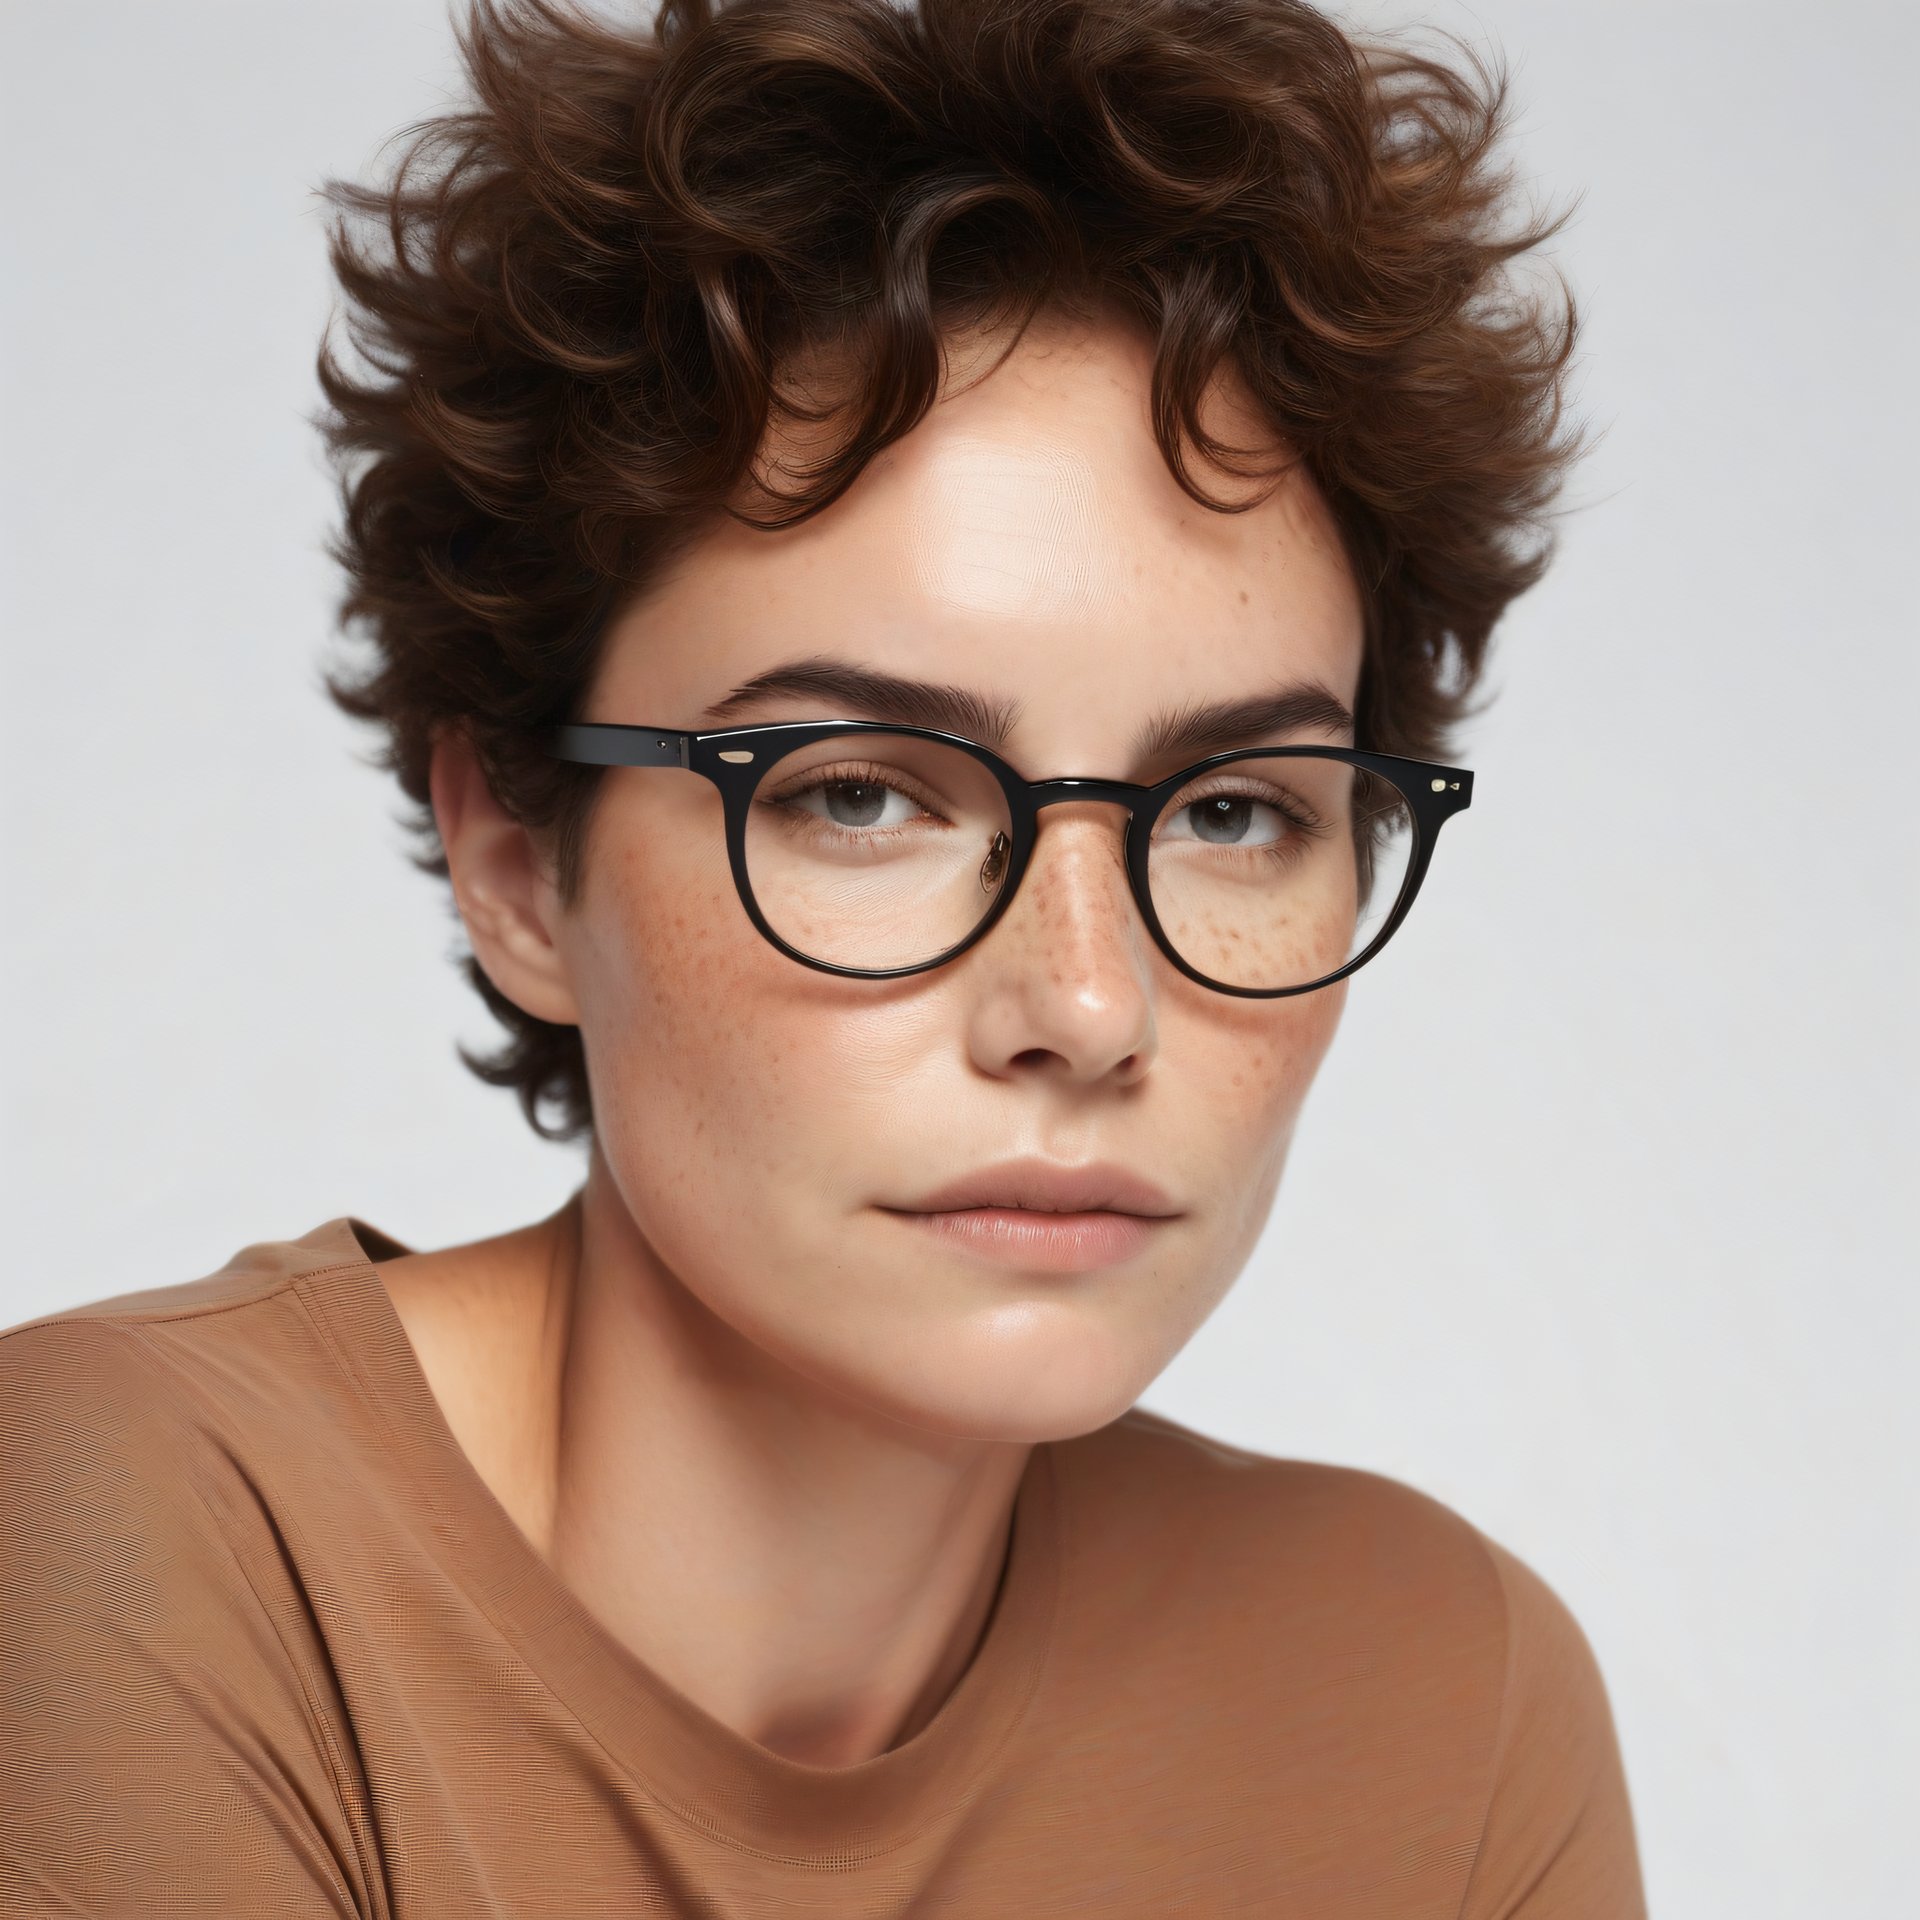 Woman in Glasses